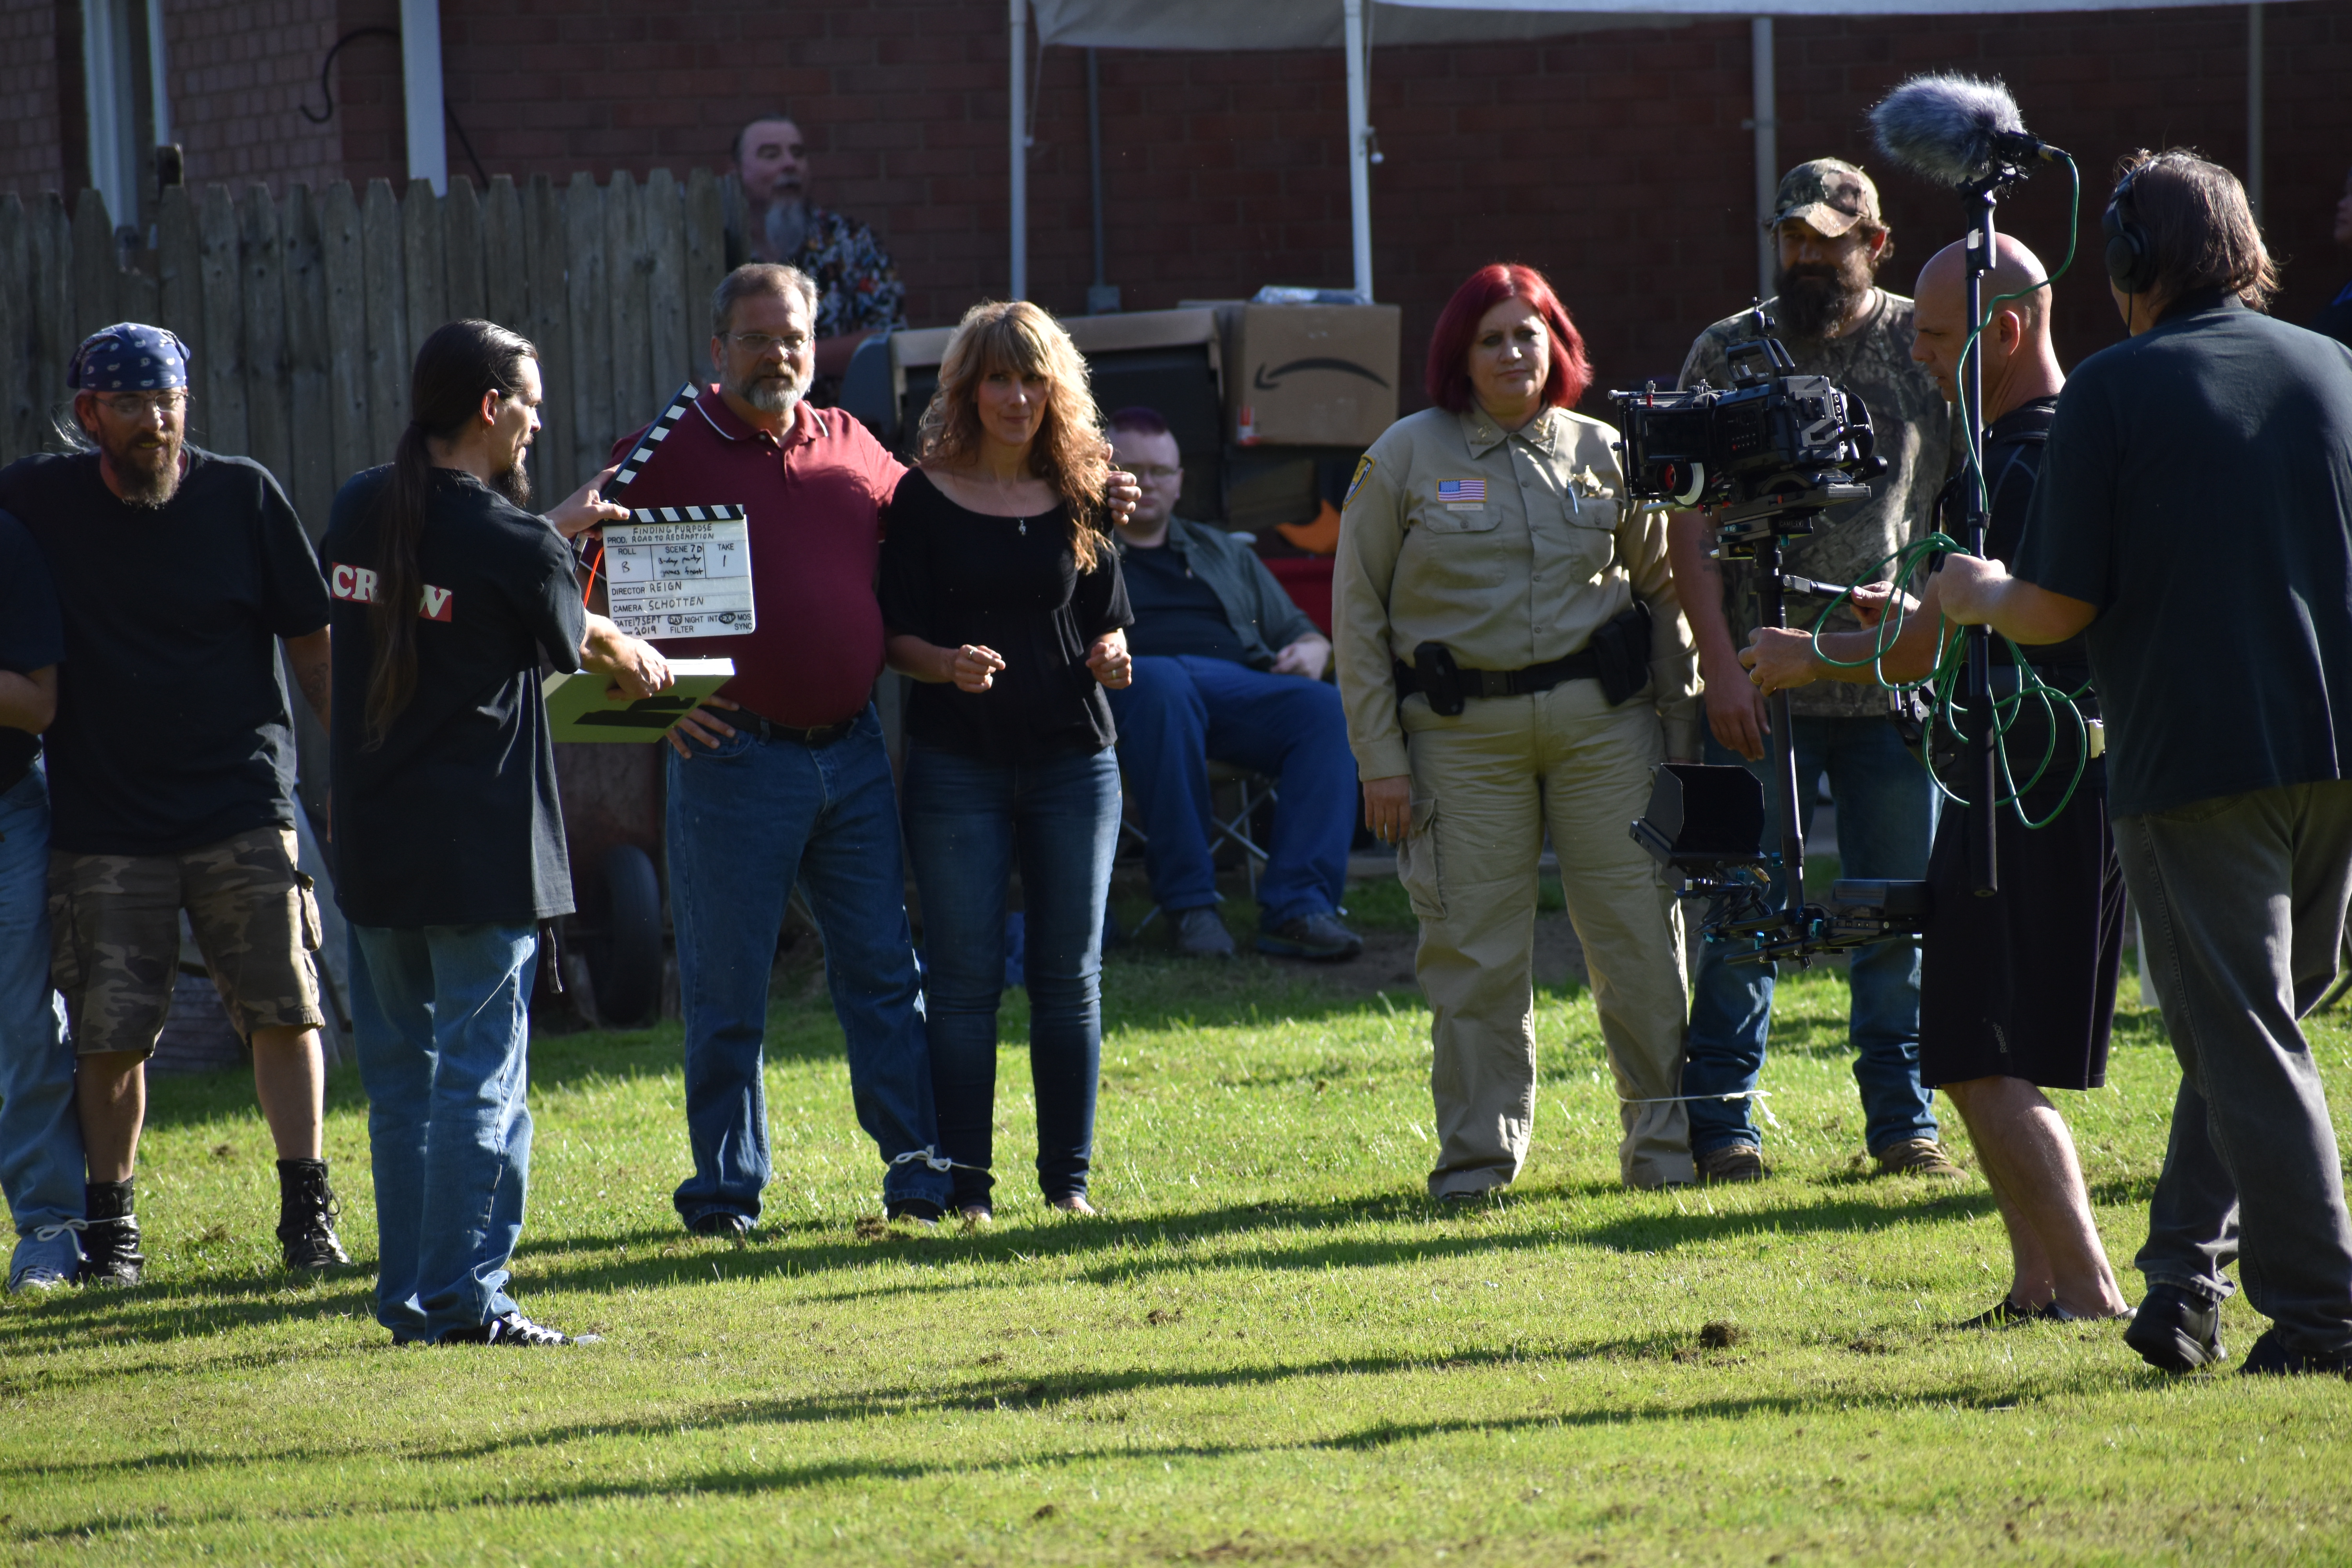 Chris Goff holds the clapperboard to set up a shot. Also shown are, from left, Ross Carlo, Ed McIntosh, Heidi Wlodarski, Milly Phipps, Charles Wedge, Bill Schotten and William Long.